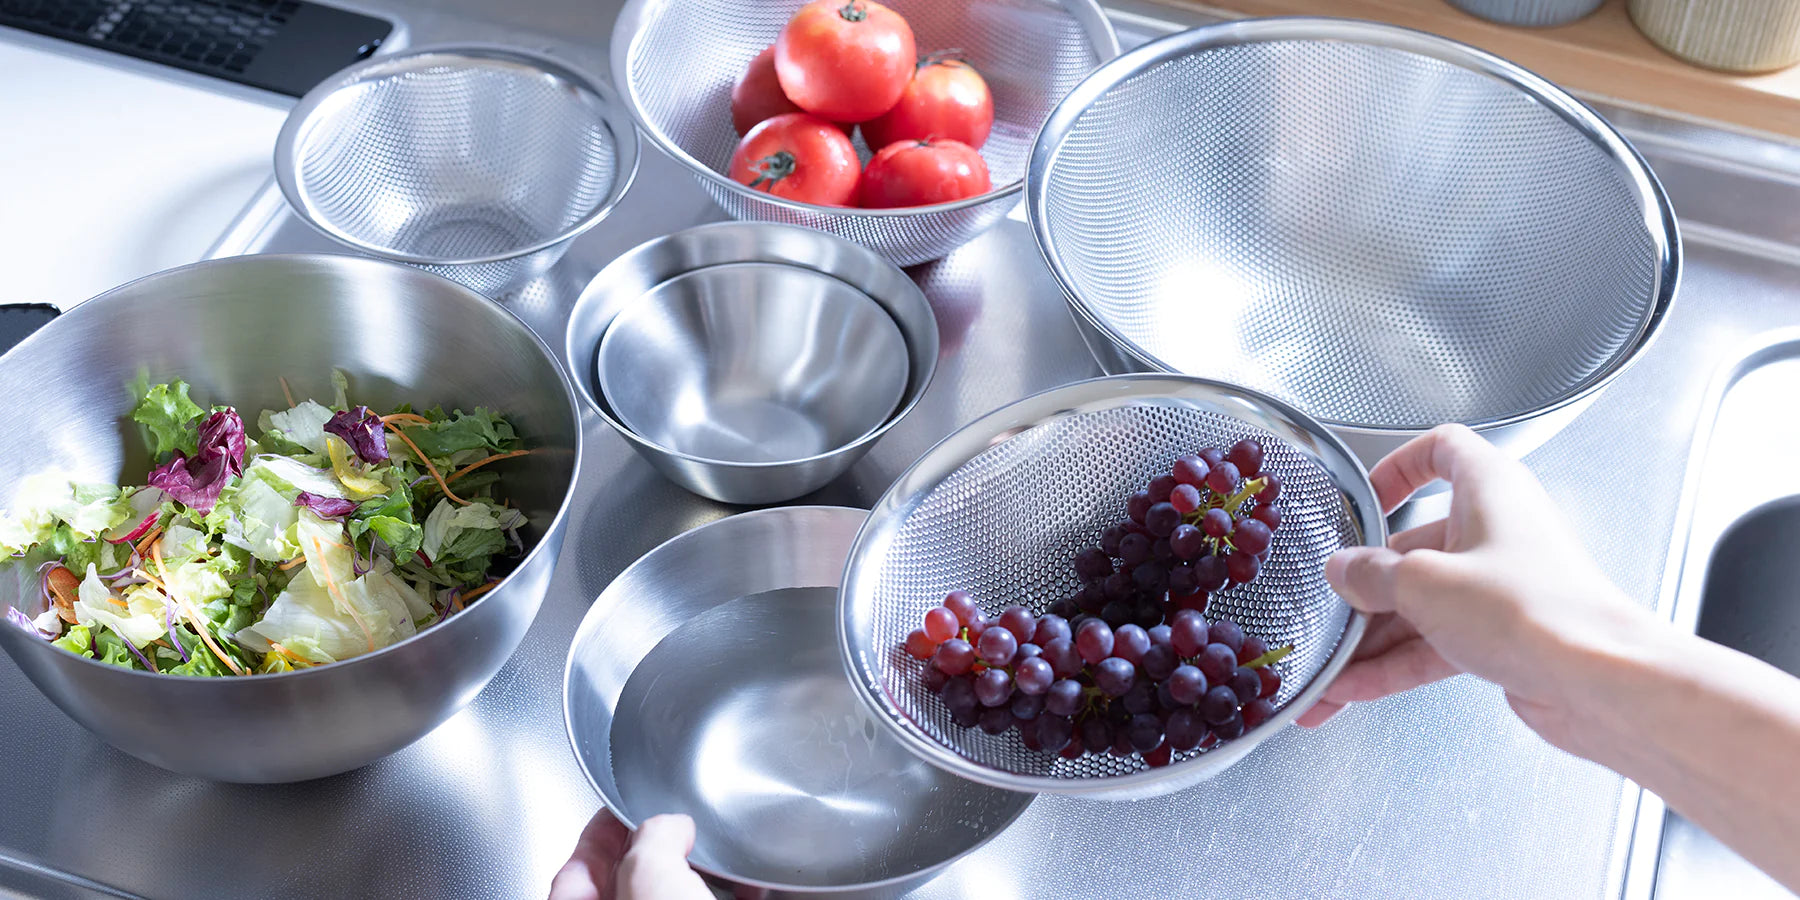 Discover our great selection of Mixing Bowls at Globalkitchen Japan.